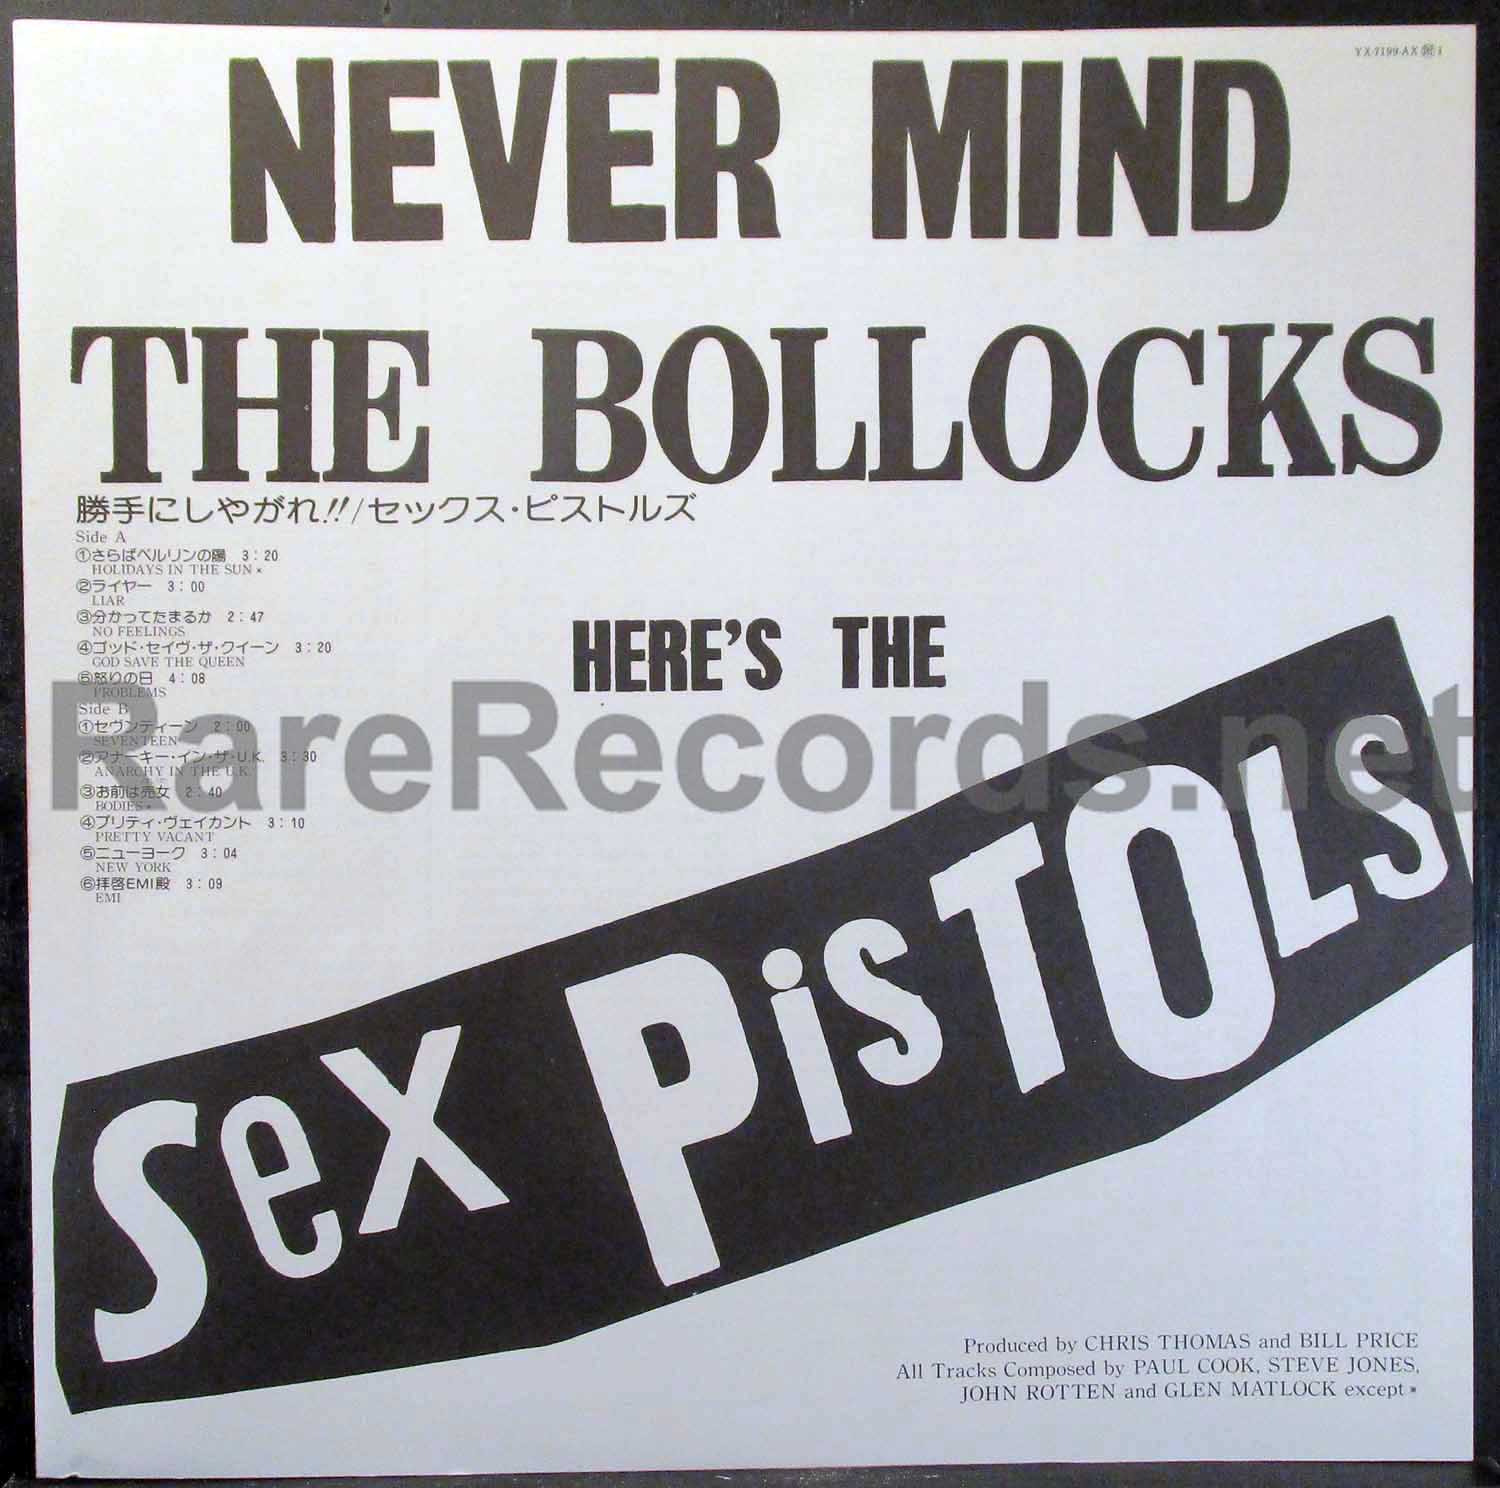 Sex Pistols - Never Mind the Bollocks 1977 Japan first issue LP with obi